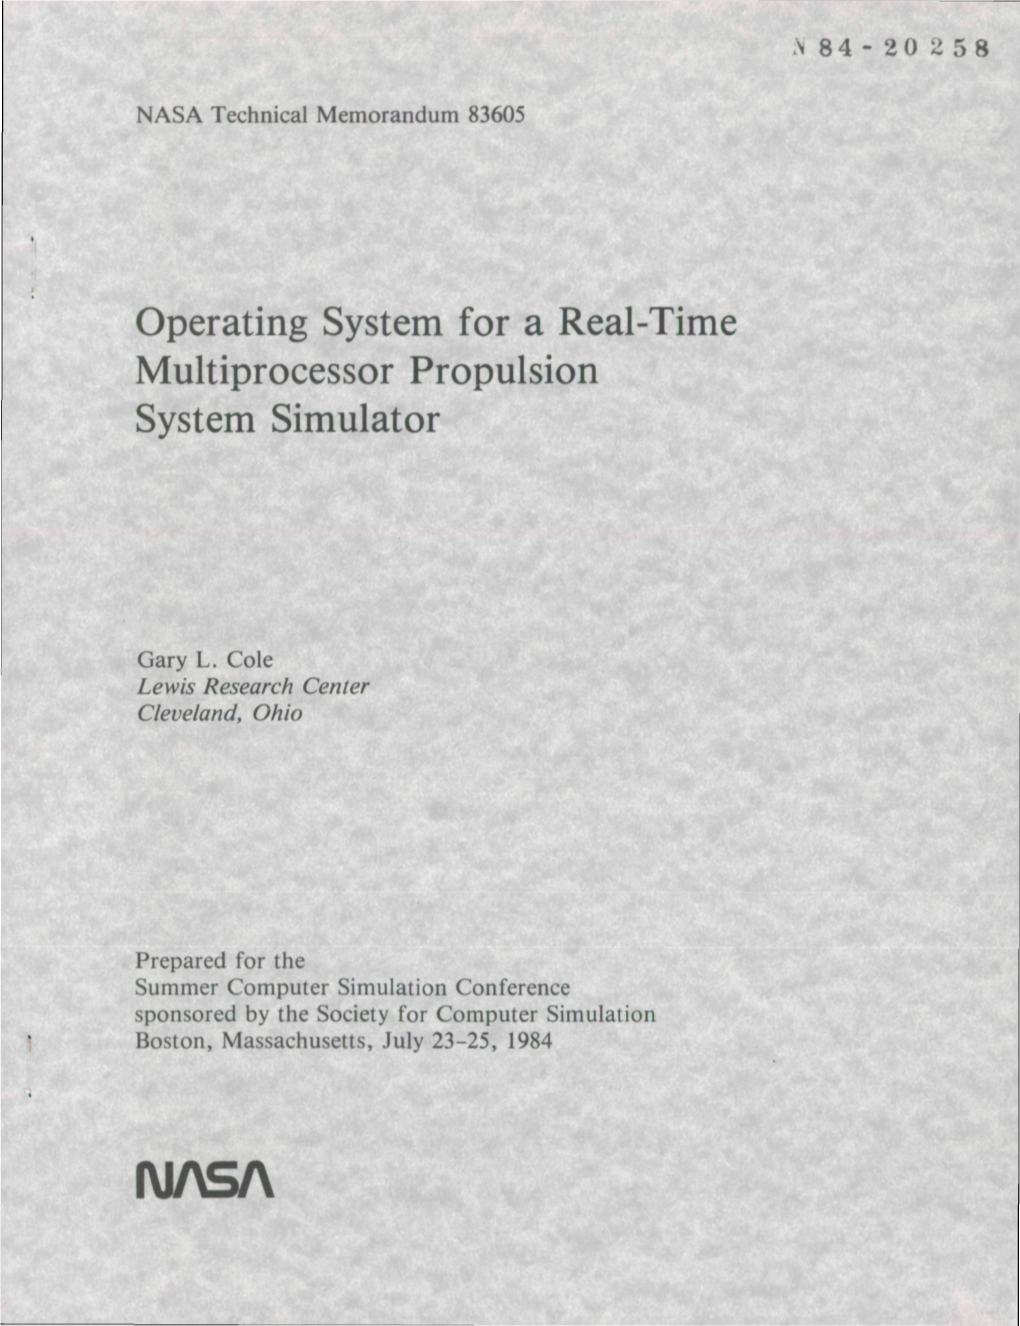 Operating System for a Real-Time Multiprocessor Propulsion System Simulator